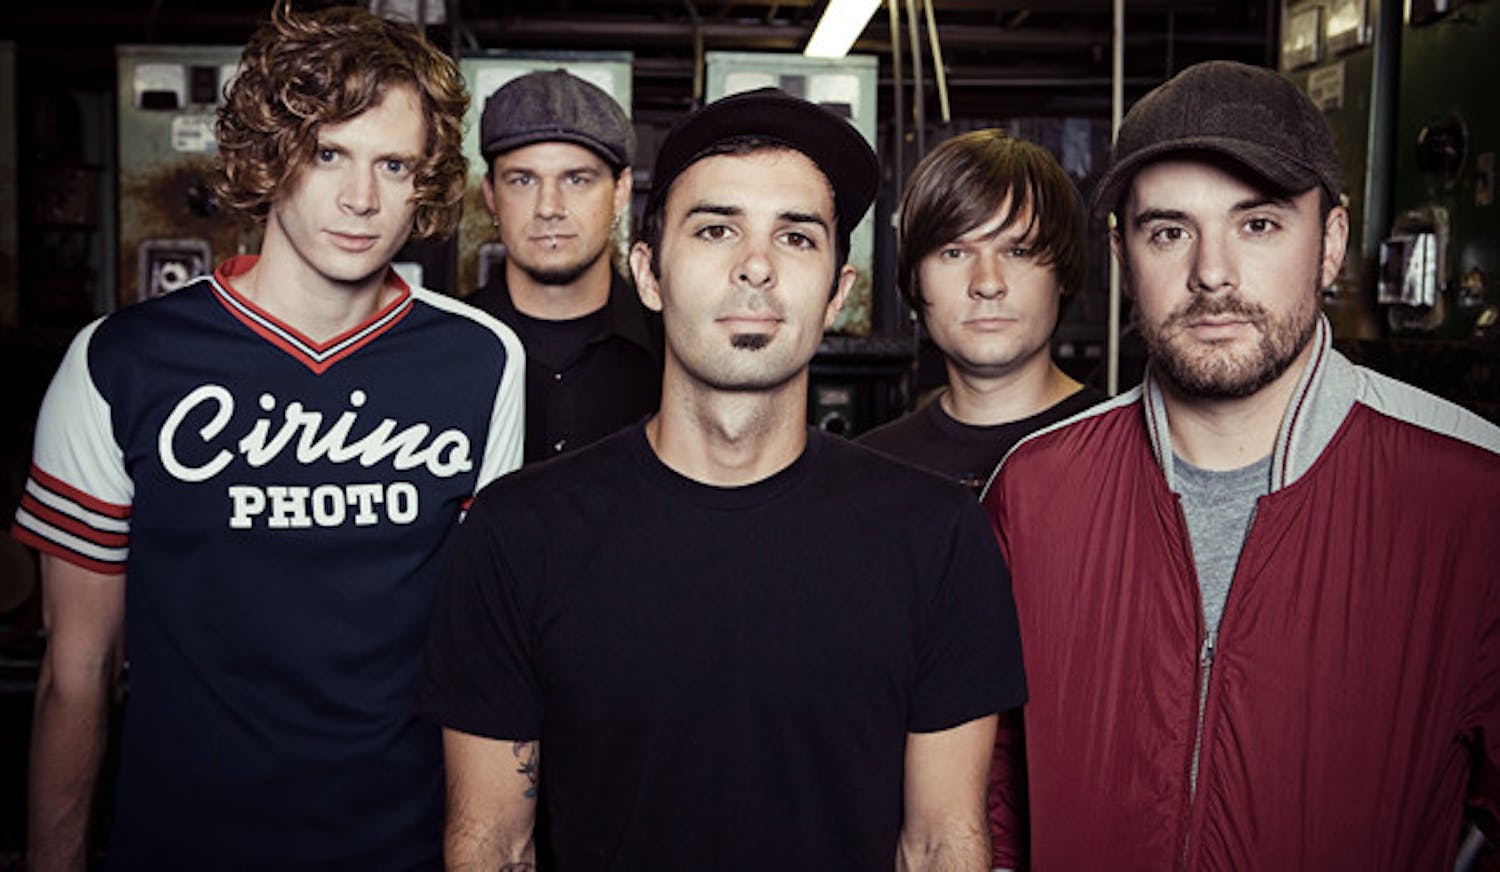 Relient K will be a headliner on Saturday at this year's Rock the Universe at Universal Orlando Resort. Other headliners for the two-day event include Switchfoot, Anberlin, Casting Crowns, Third Day and David Crowder Band.